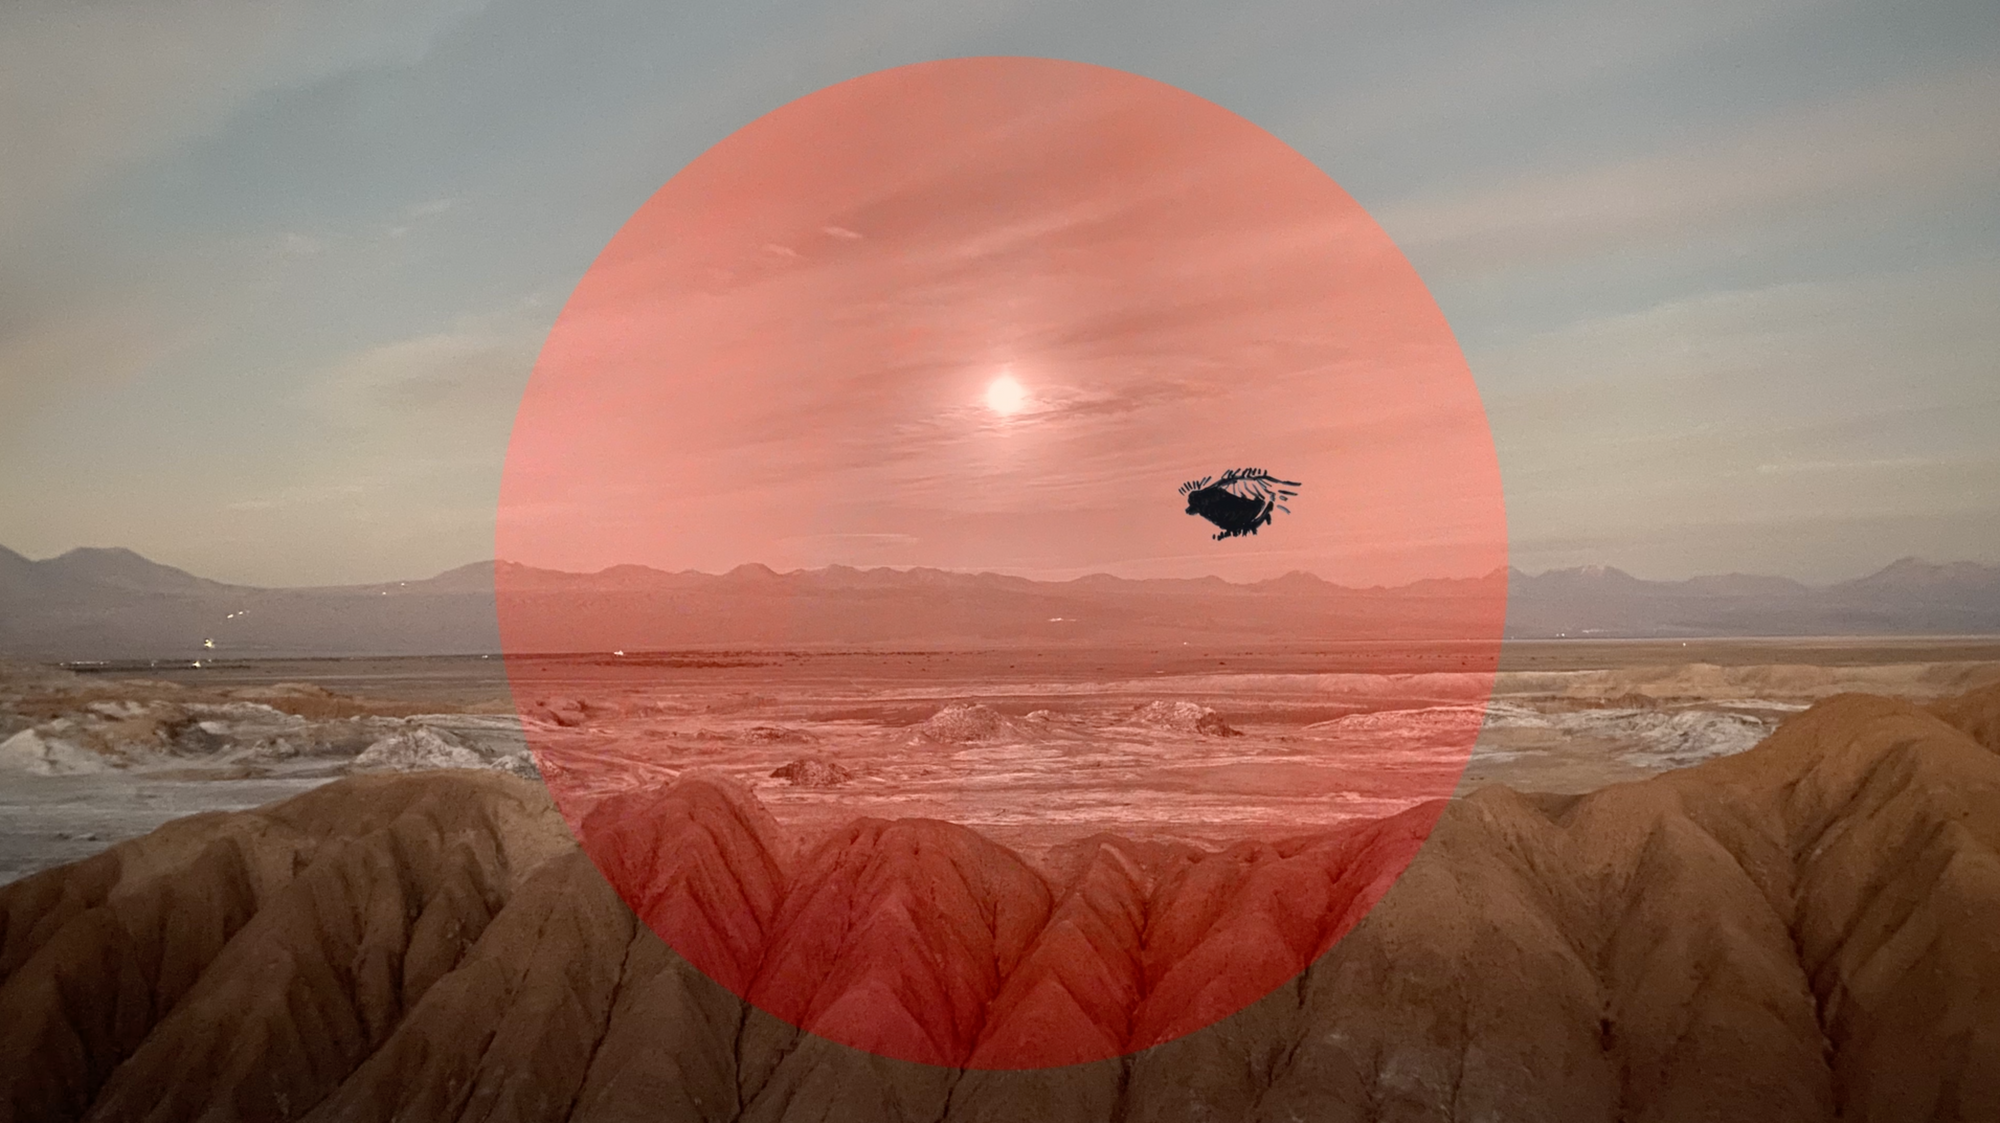 Giant red circle in the foreground hovering over a desert, mountainous landscape. A small shadowed creature flies in front of the circle.